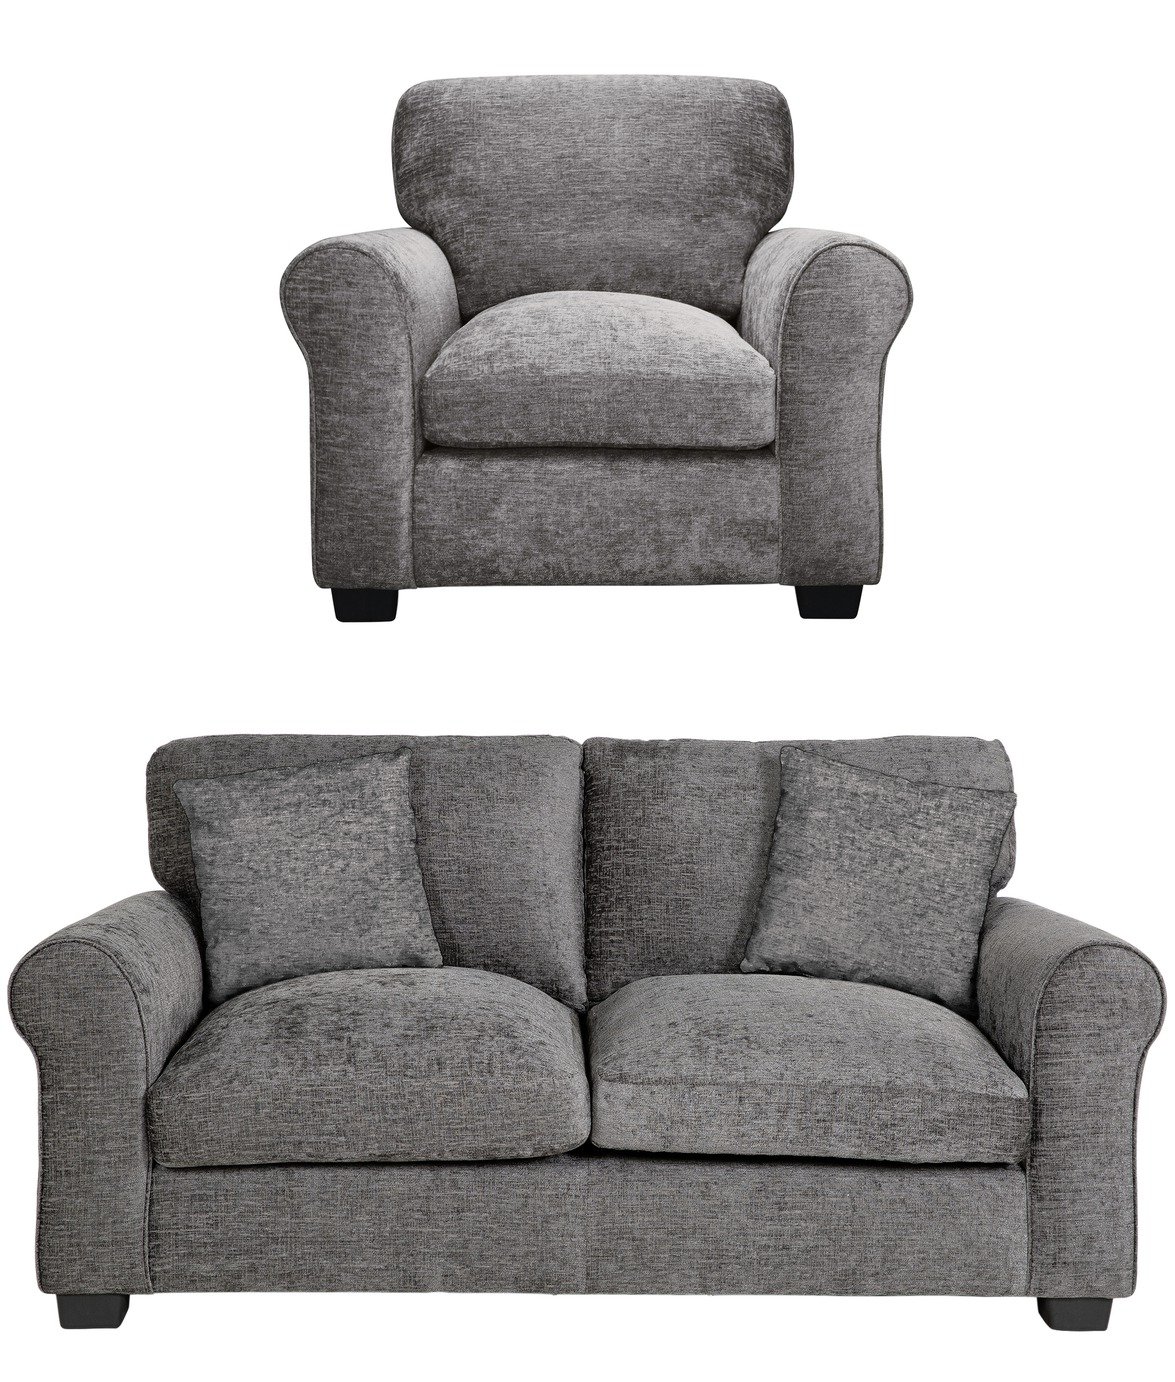 Argos Home Tammy Fabric Chair and 2 Seater Sofa - Charcoal